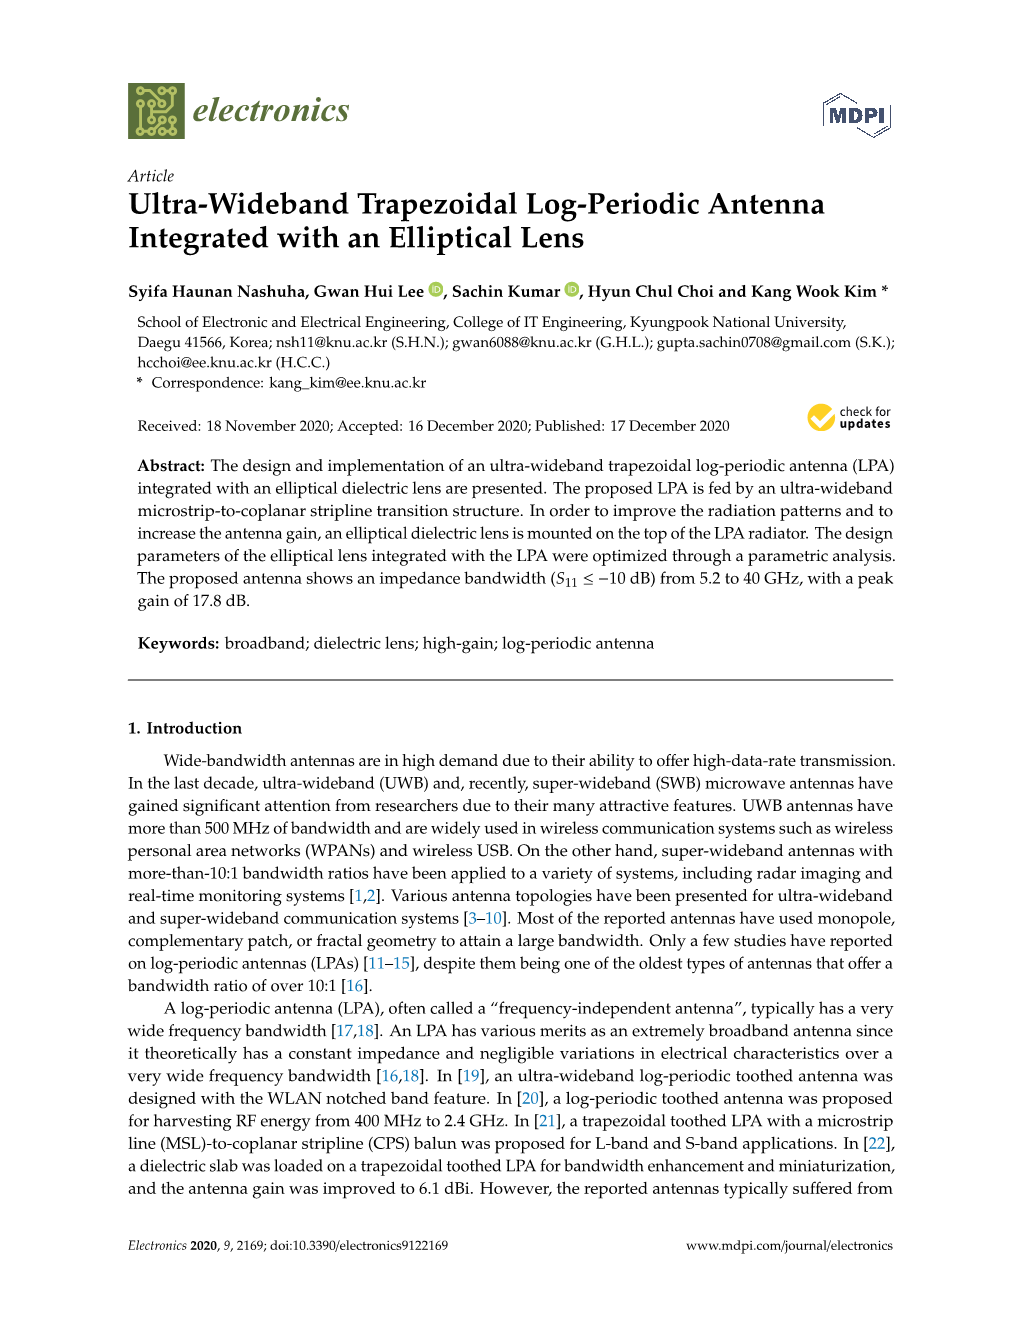 Ultra-Wideband Trapezoidal Log-Periodic Antenna Integrated with an Elliptical Lens